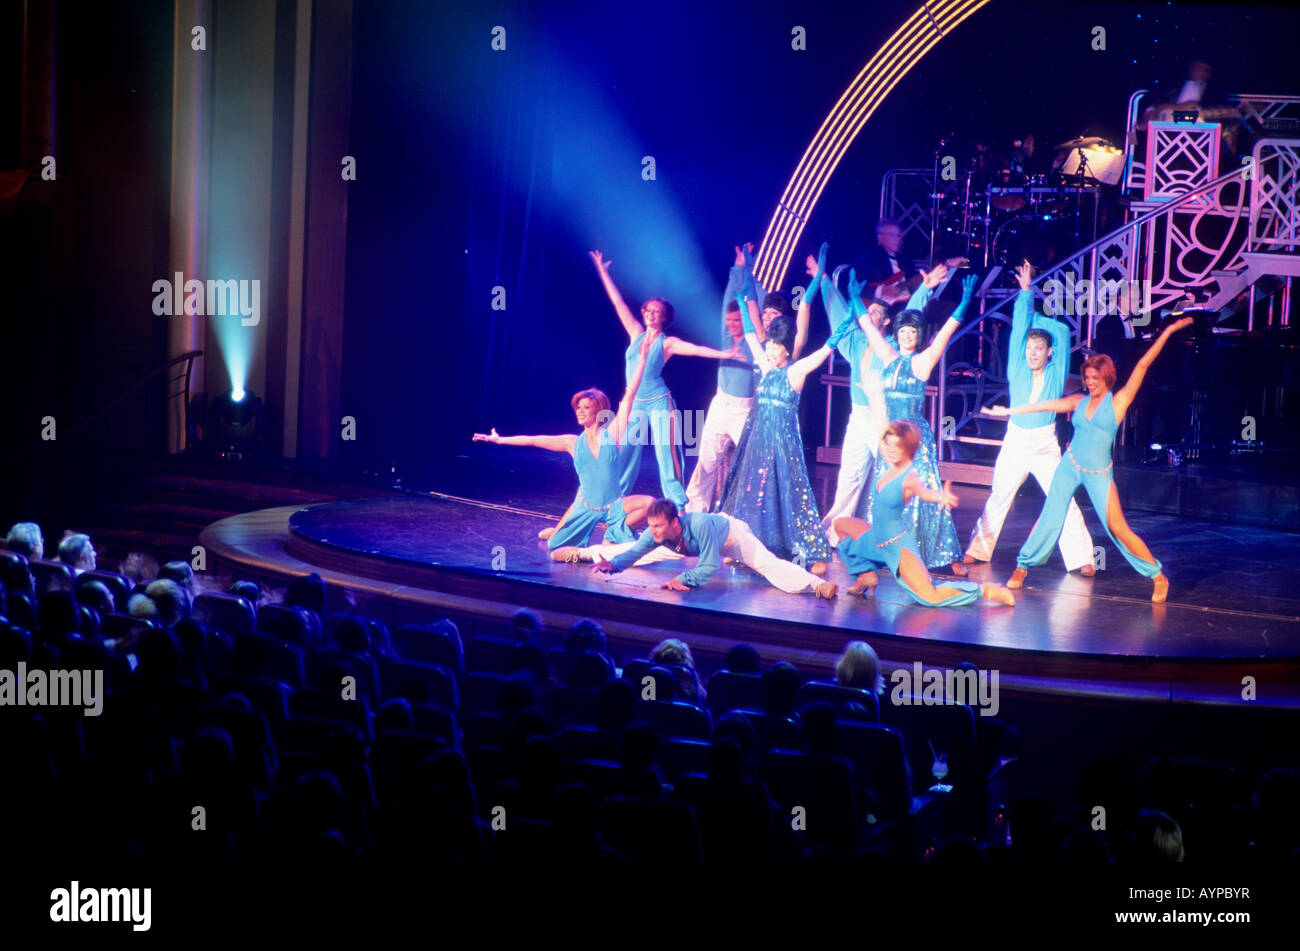 A theater show onboard entertainment on the Royal Caribbean cruise ship